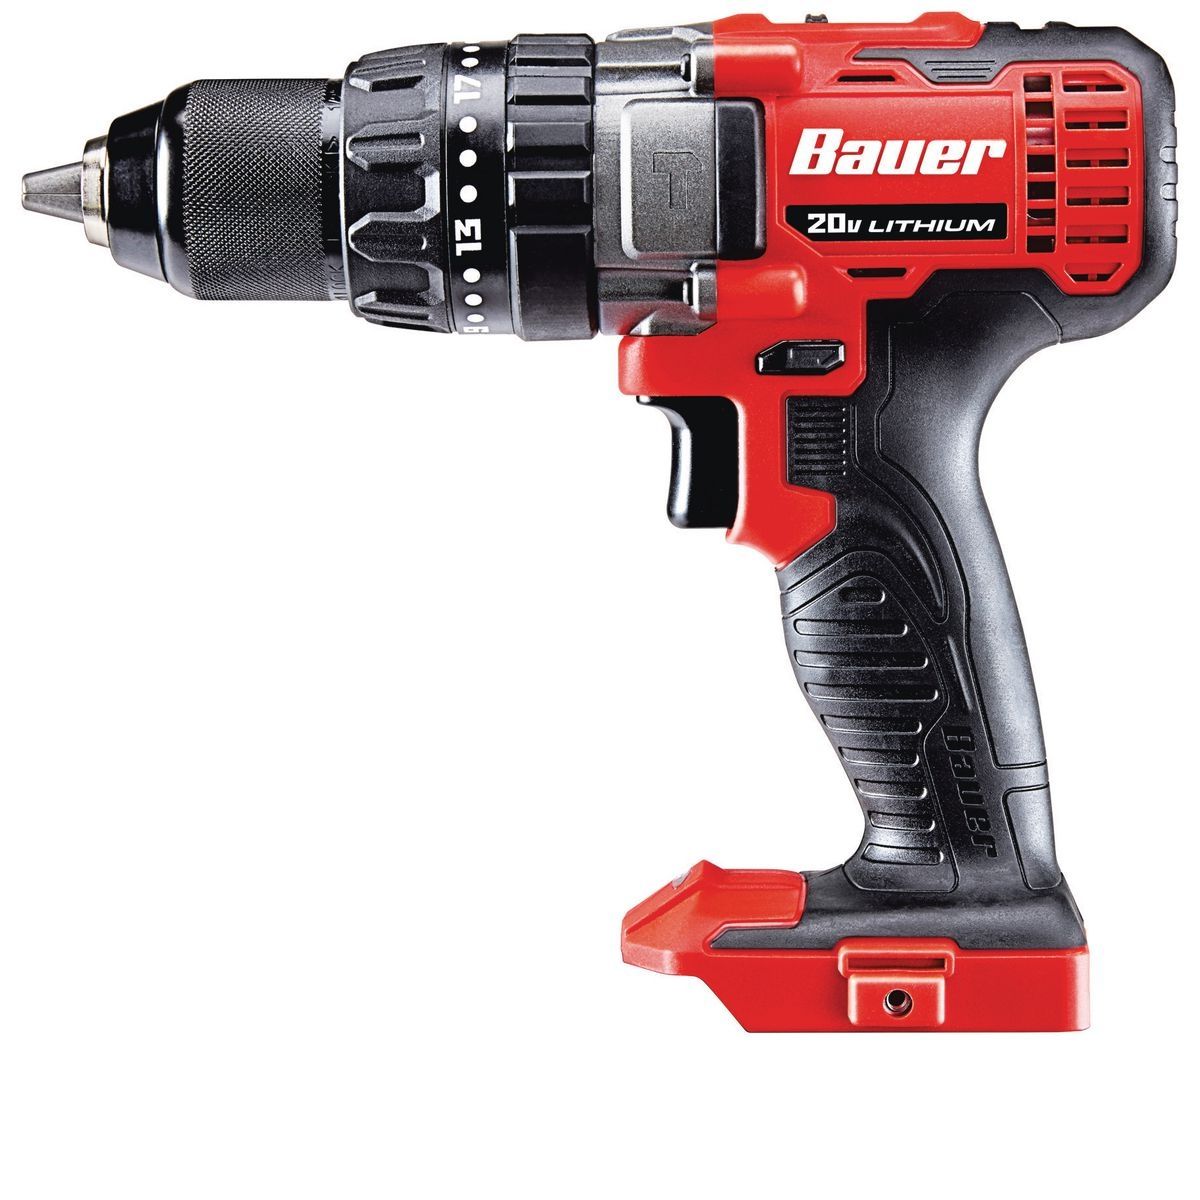 BAUER 20V Cordless 1/2 in. Variable Speed Hammer Drill/Driver - Tool Only